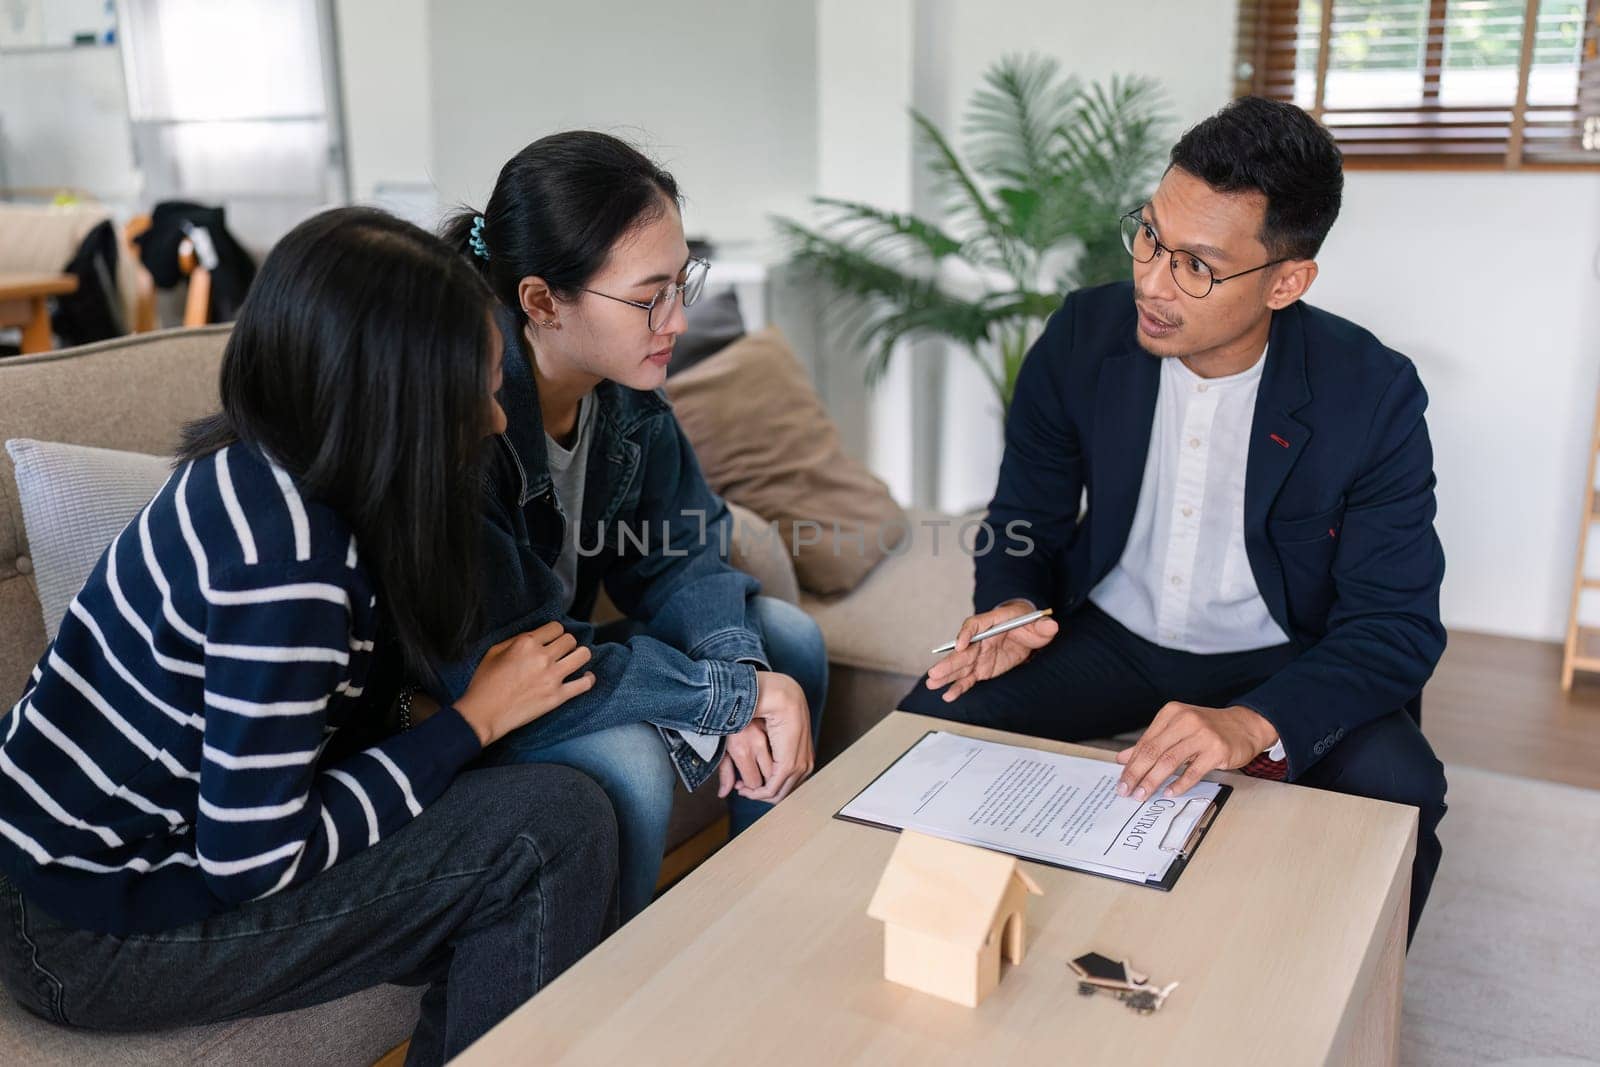 young lesbian married couple discussing agreement with real estate agent or broker. Professional financial advisor or saleswoman explaining contract detail.